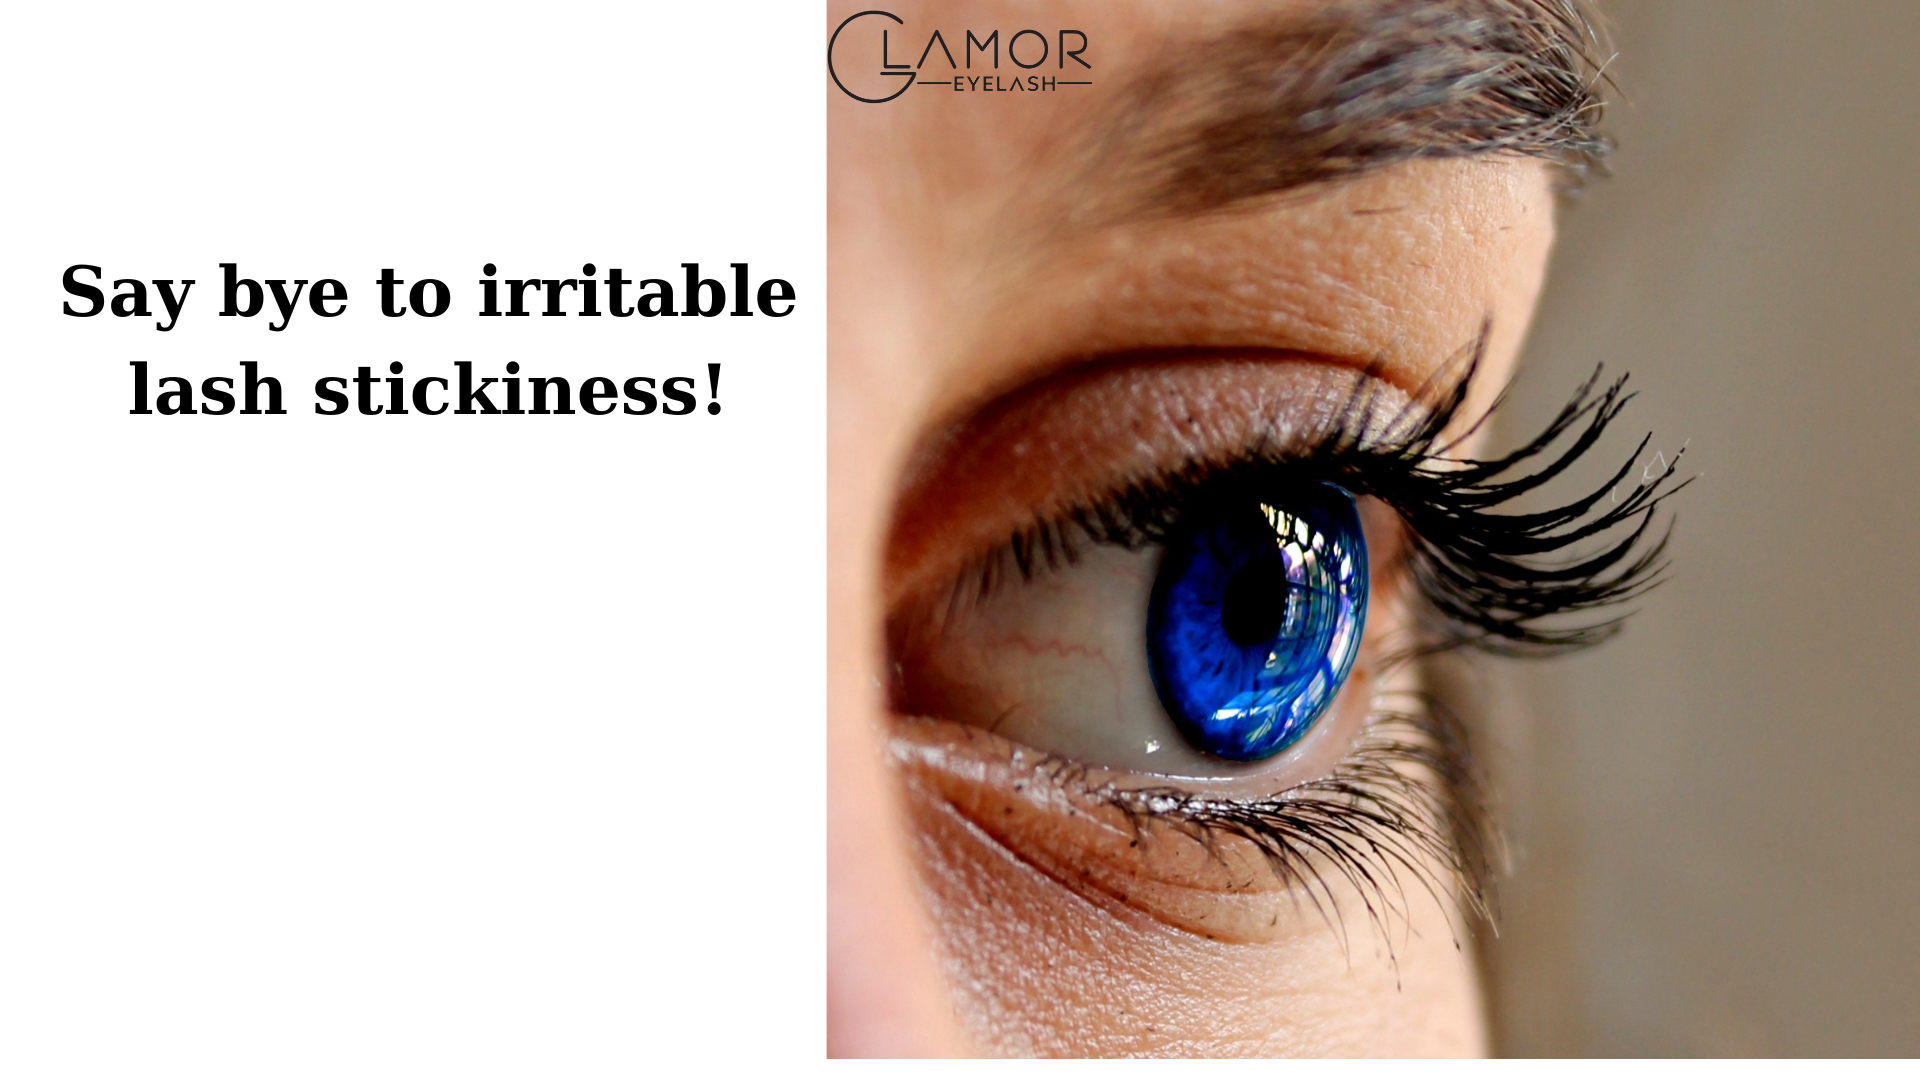 Say bye to irritable lash stickiness!